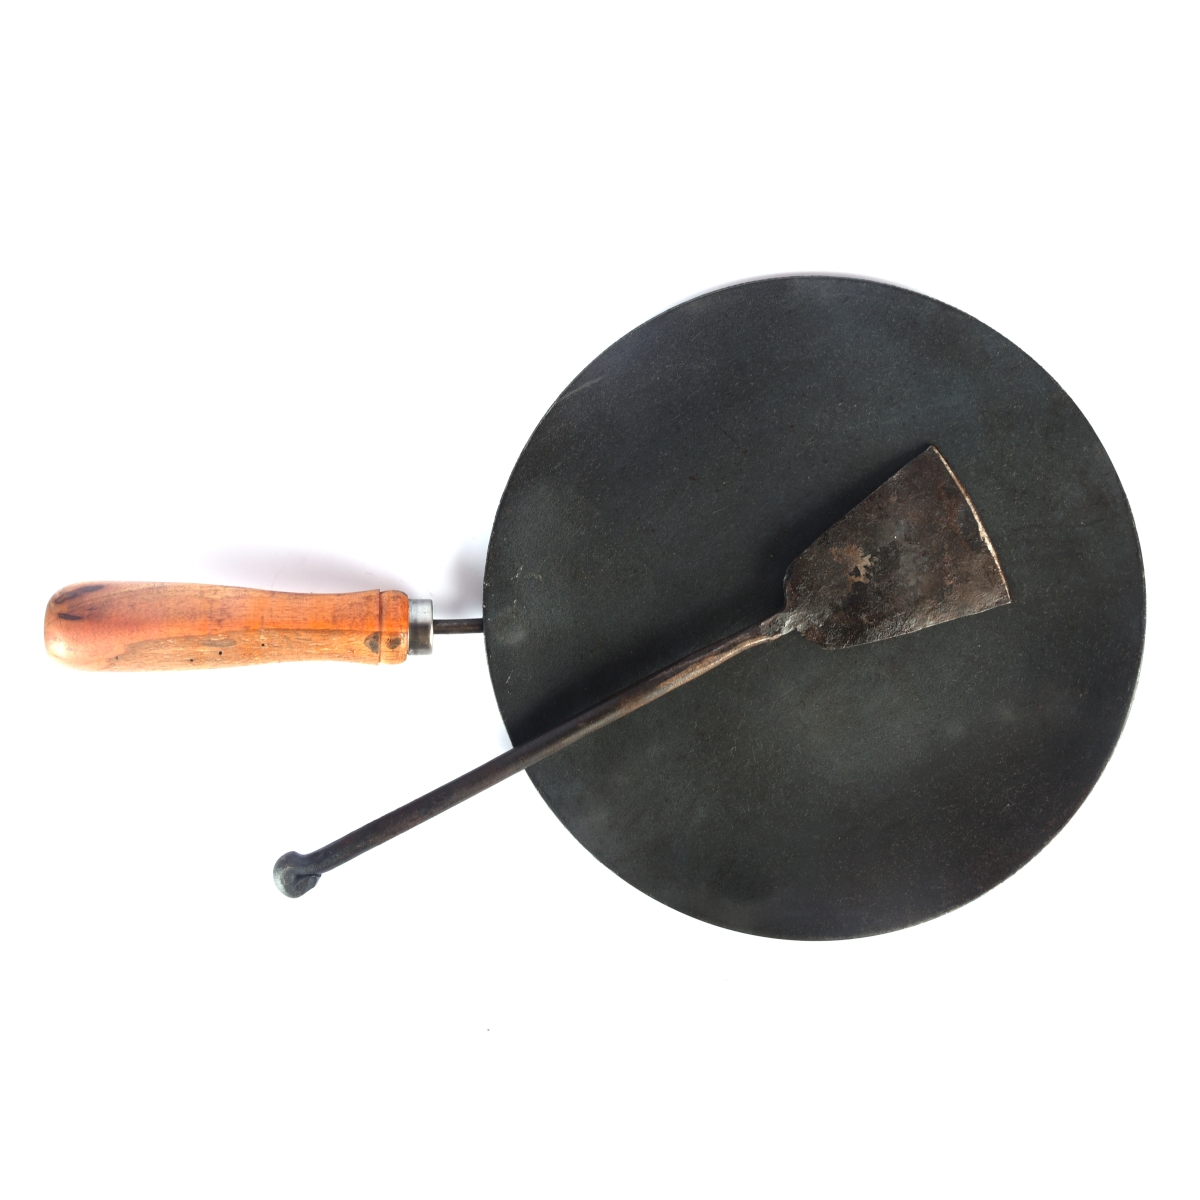 Seasoned Cast Iron Mini Grill Pan - Essential Traditions by Kayal